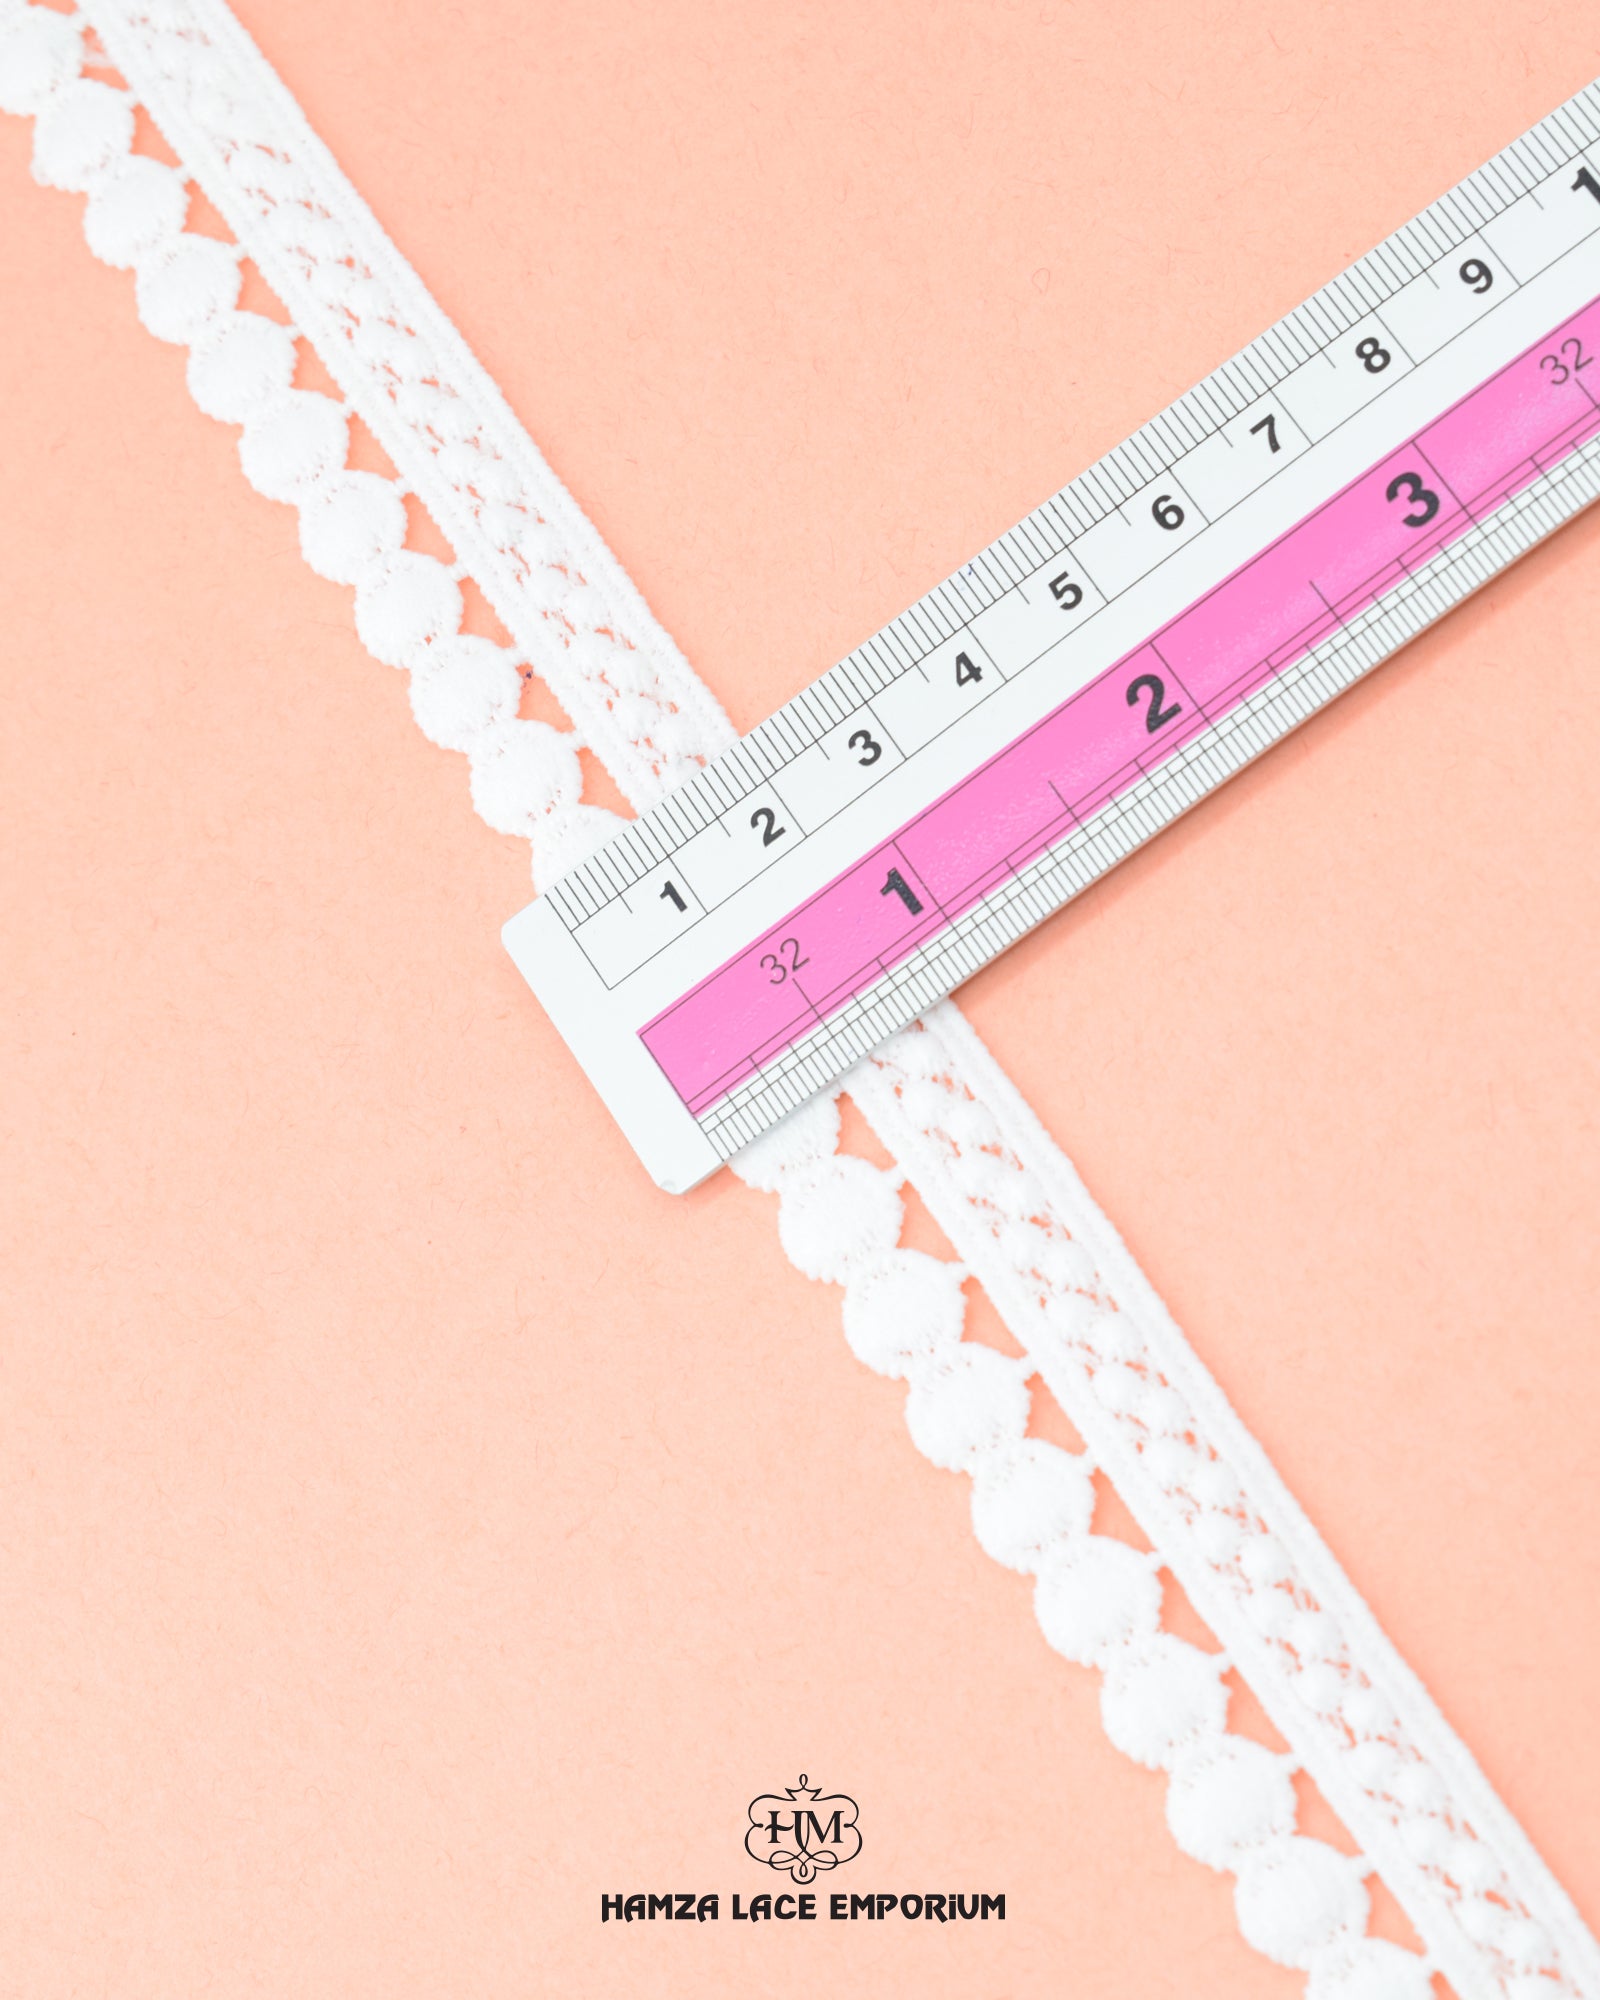 Size of the 'Edging Loop Lace 23368' is shown as '1' inch with the help of a ruler